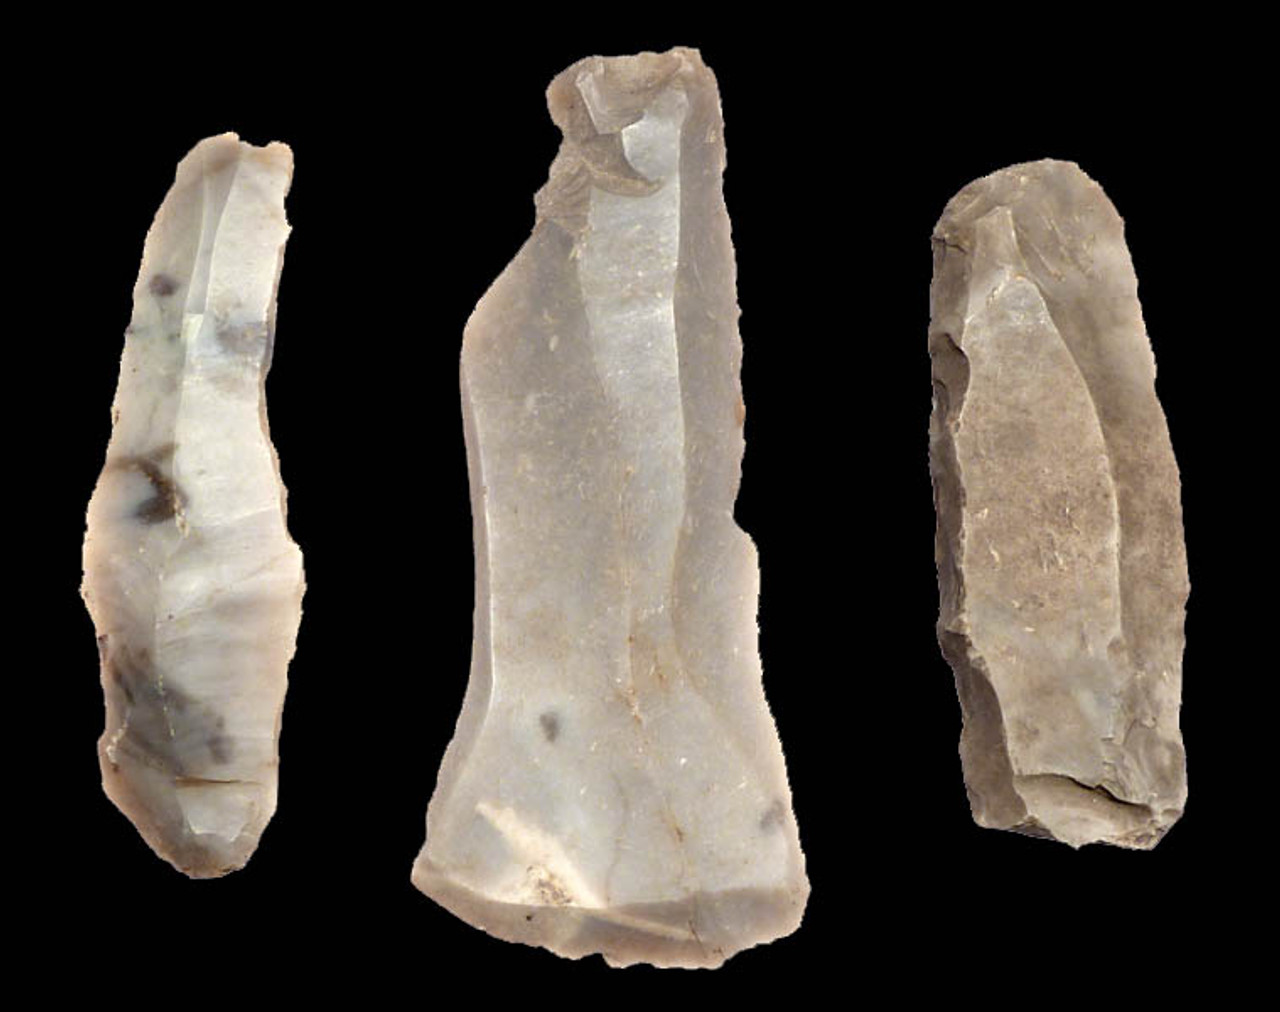 N115 - SUPERB SET OF 3 UNBROKEN LONG FLINT EUROPEAN NEOLITHIC STONE KNIFE BLADES WITH VARIOUS EDUCATIONAL FEATURES